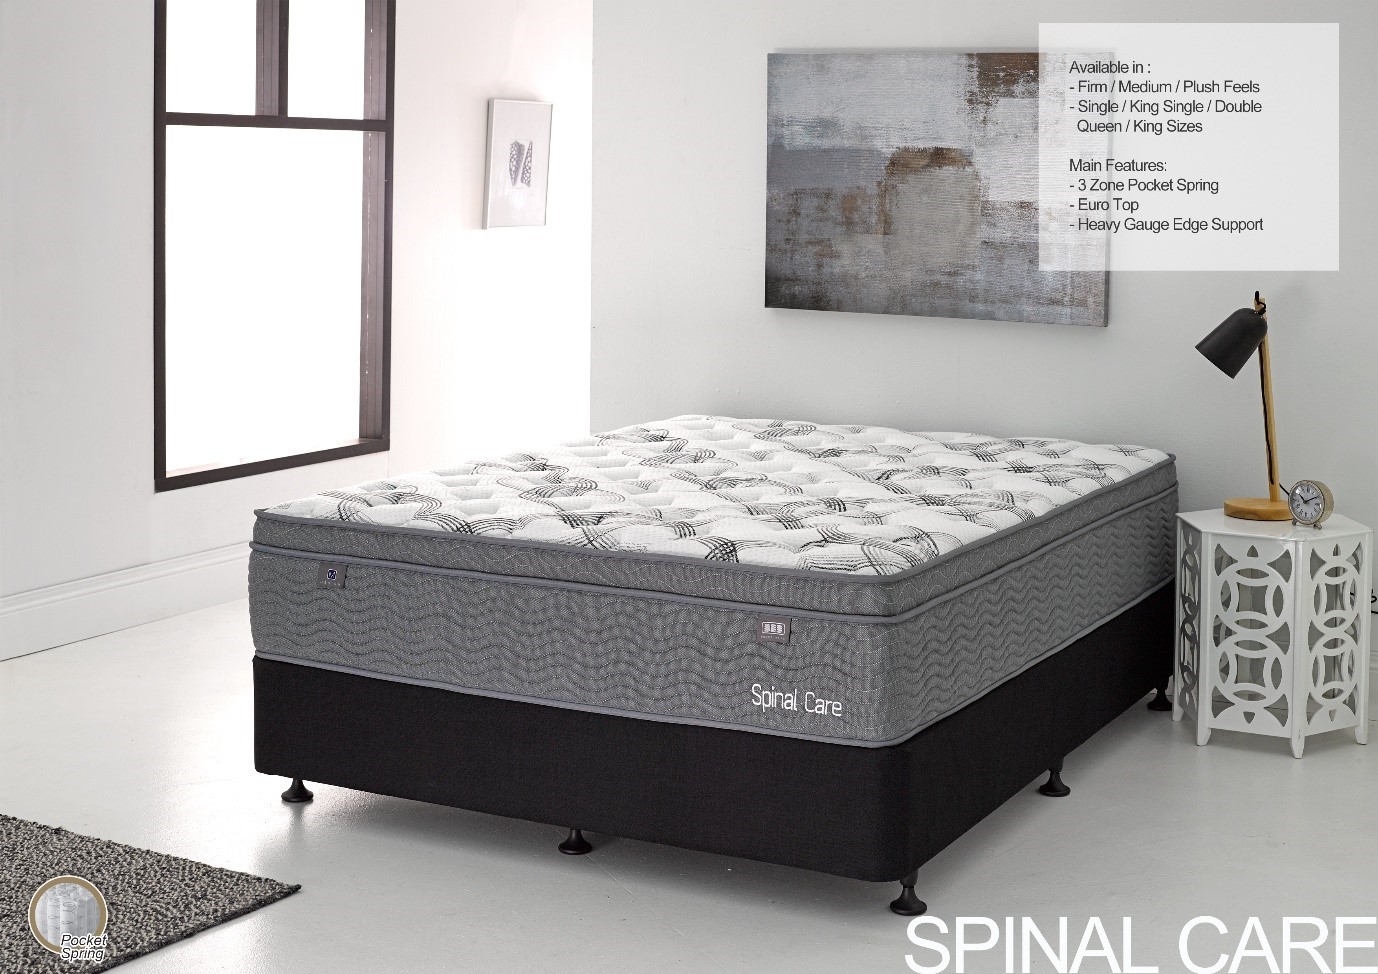 spinal care mattress review